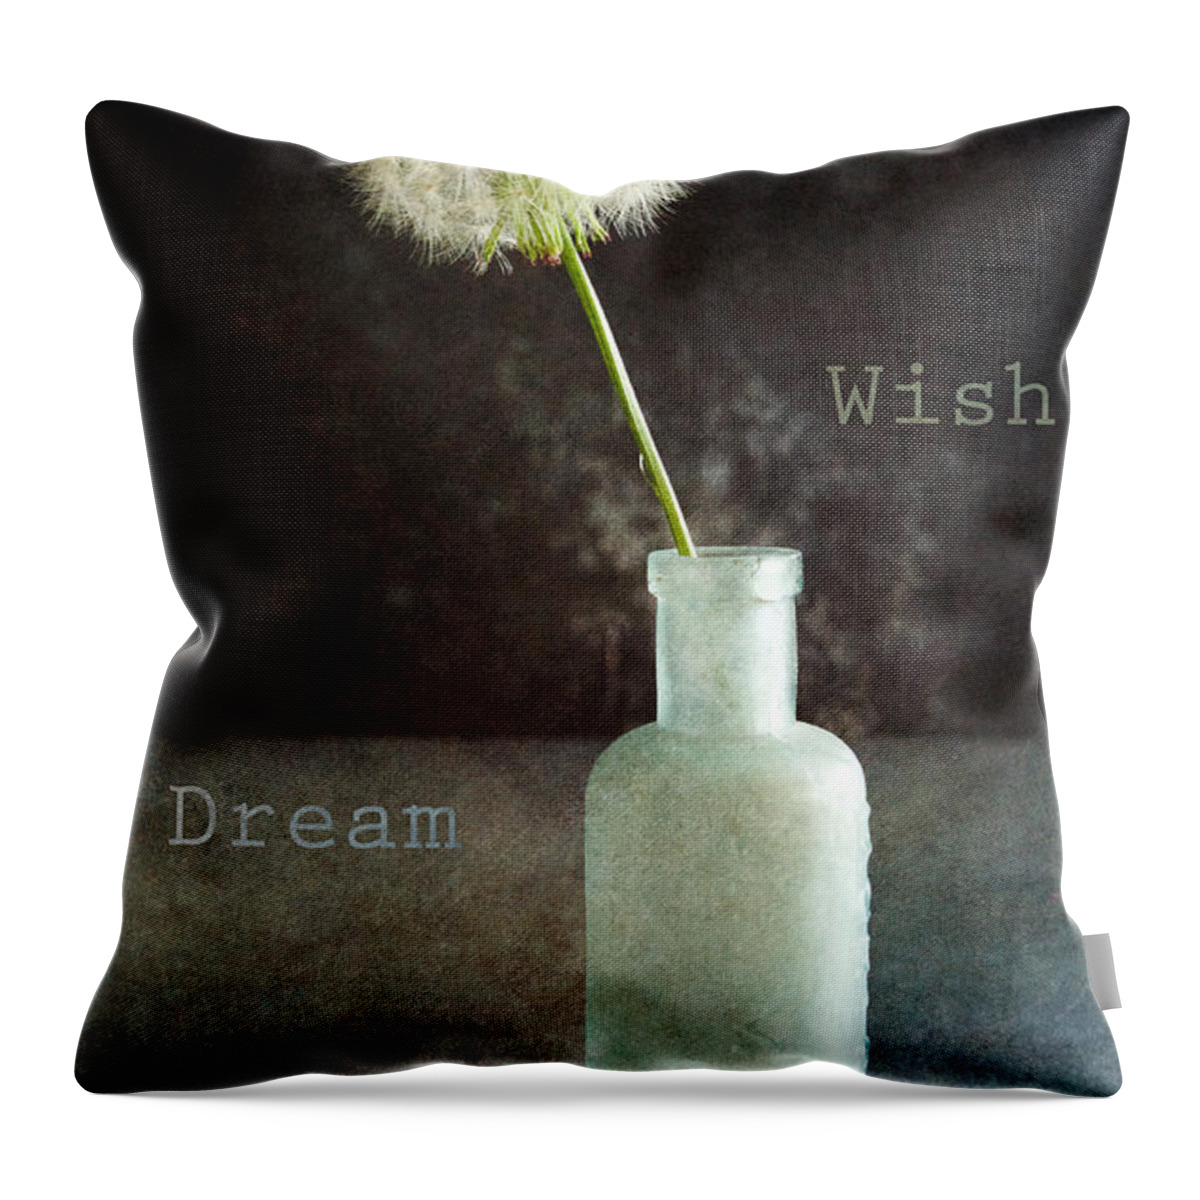 Wish Throw Pillow featuring the photograph Wish and Dream by Randi Kuhne